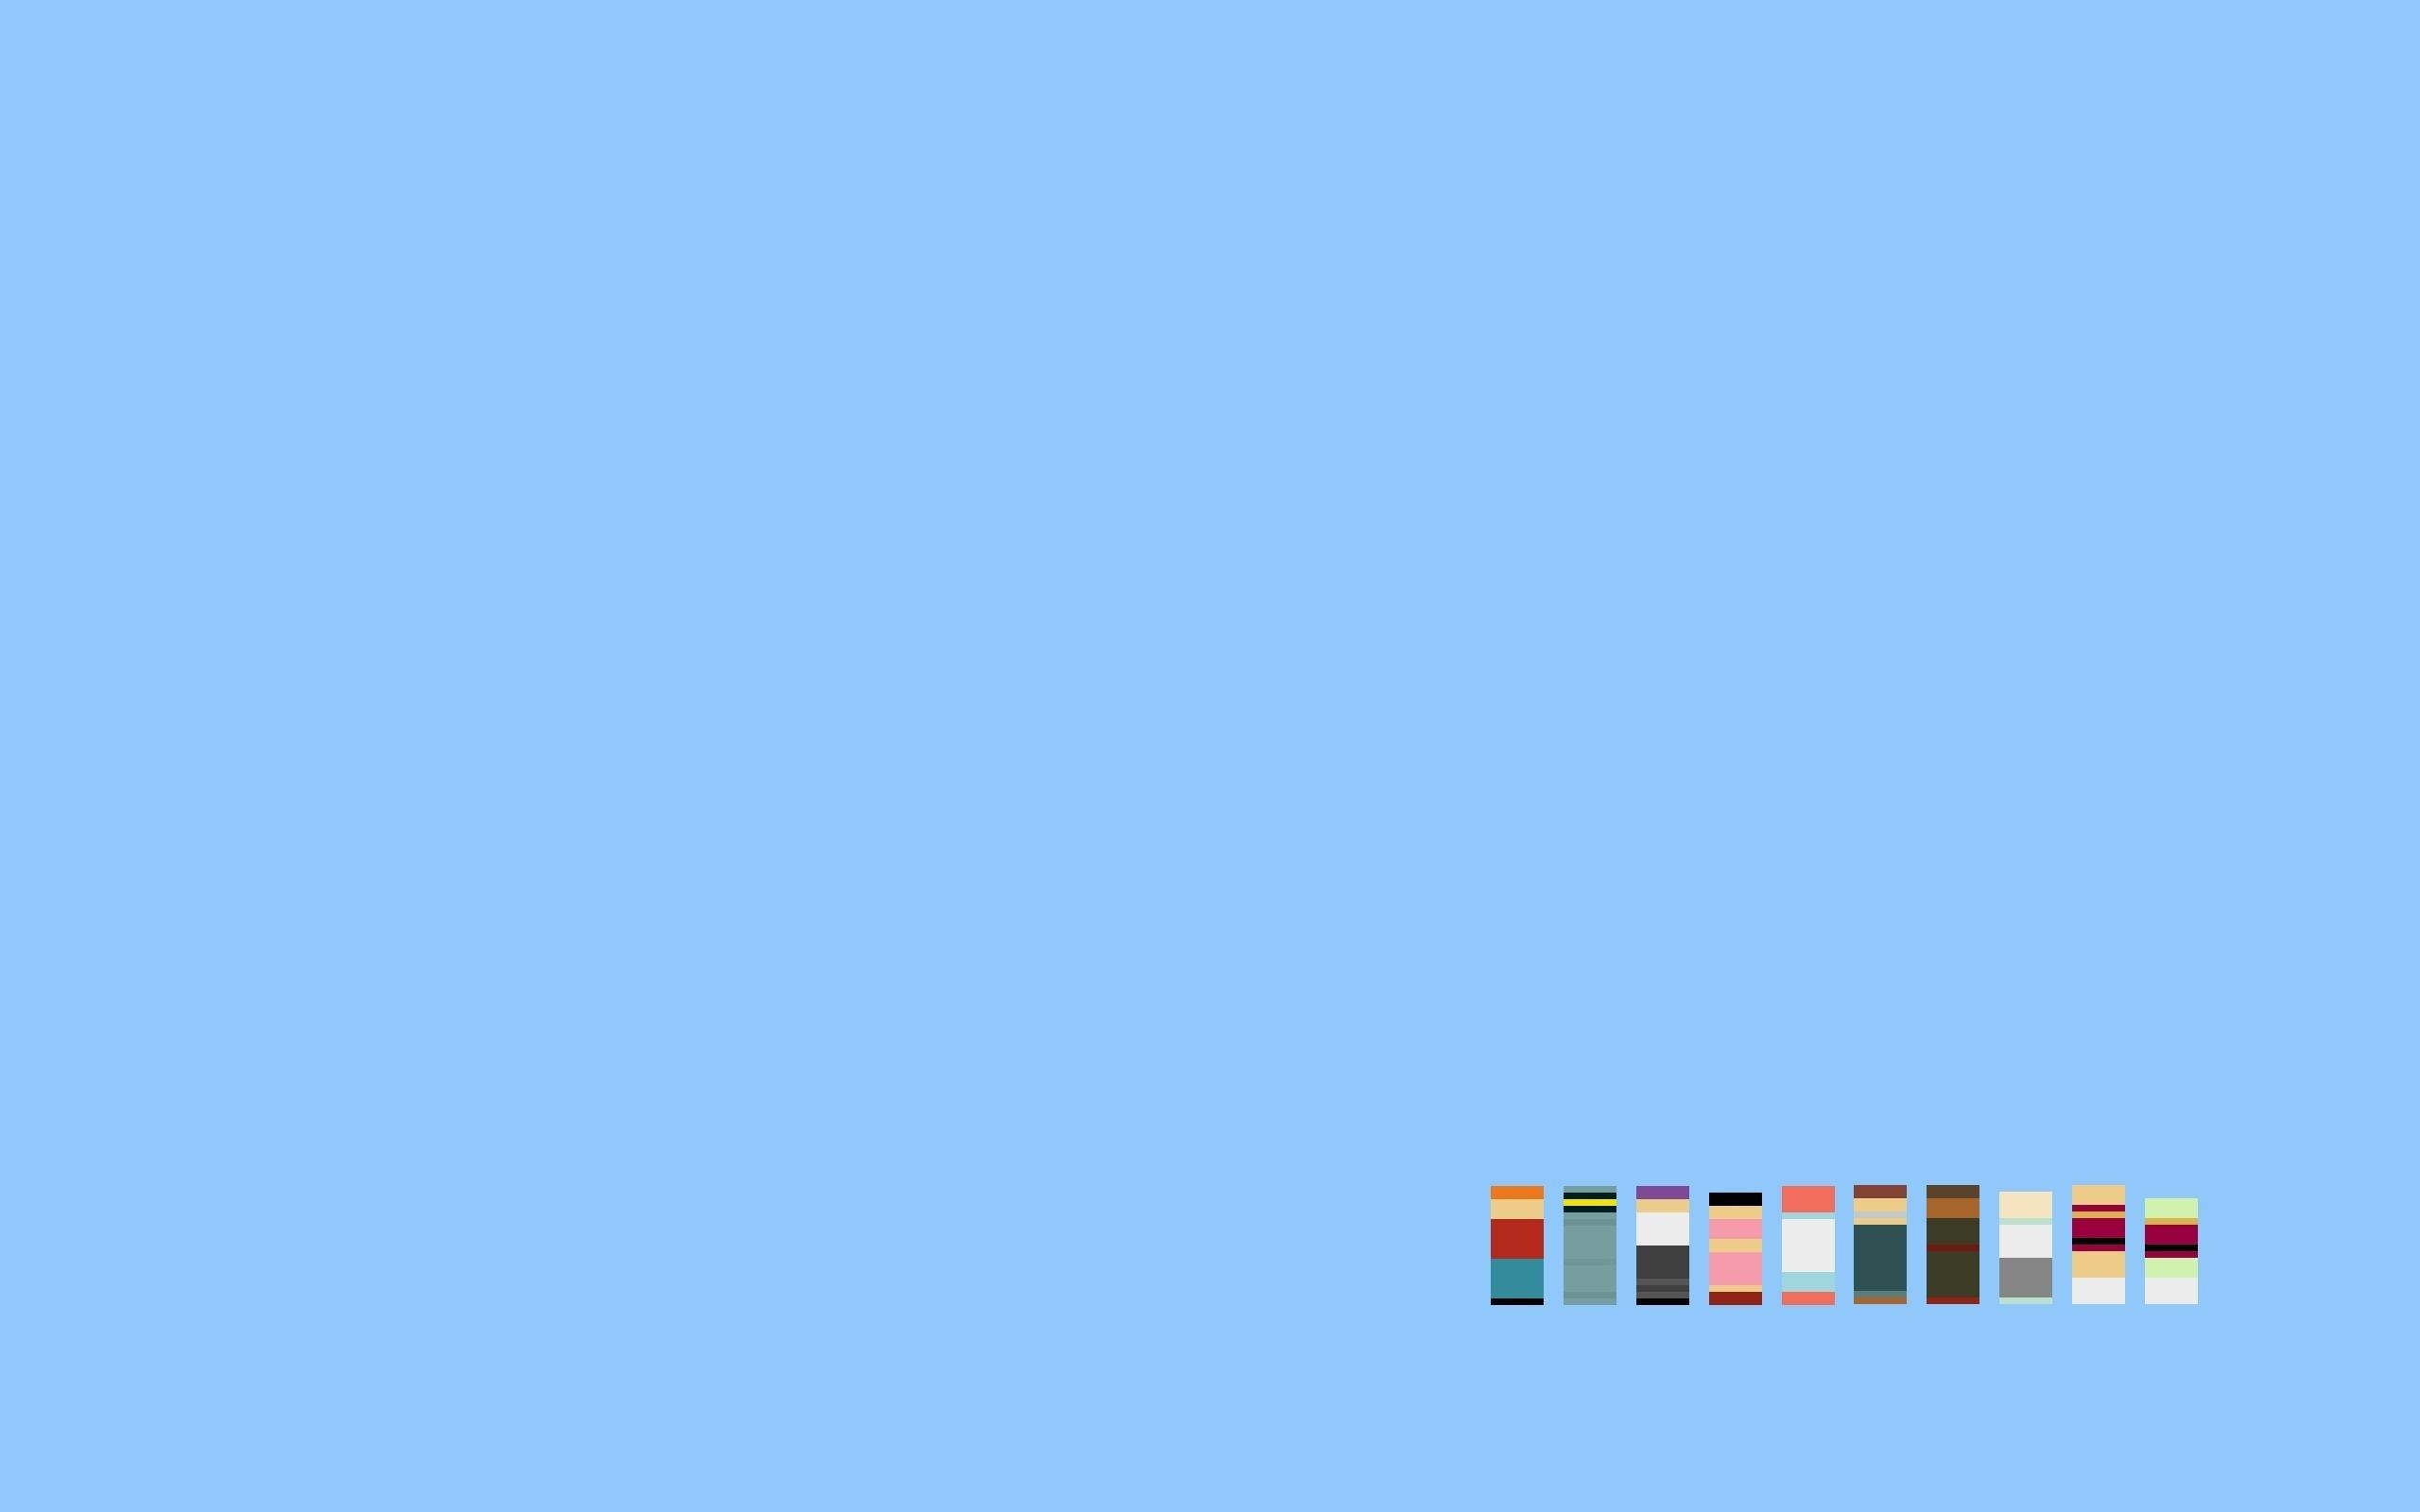 A blue background with several colored lines - Minimalist